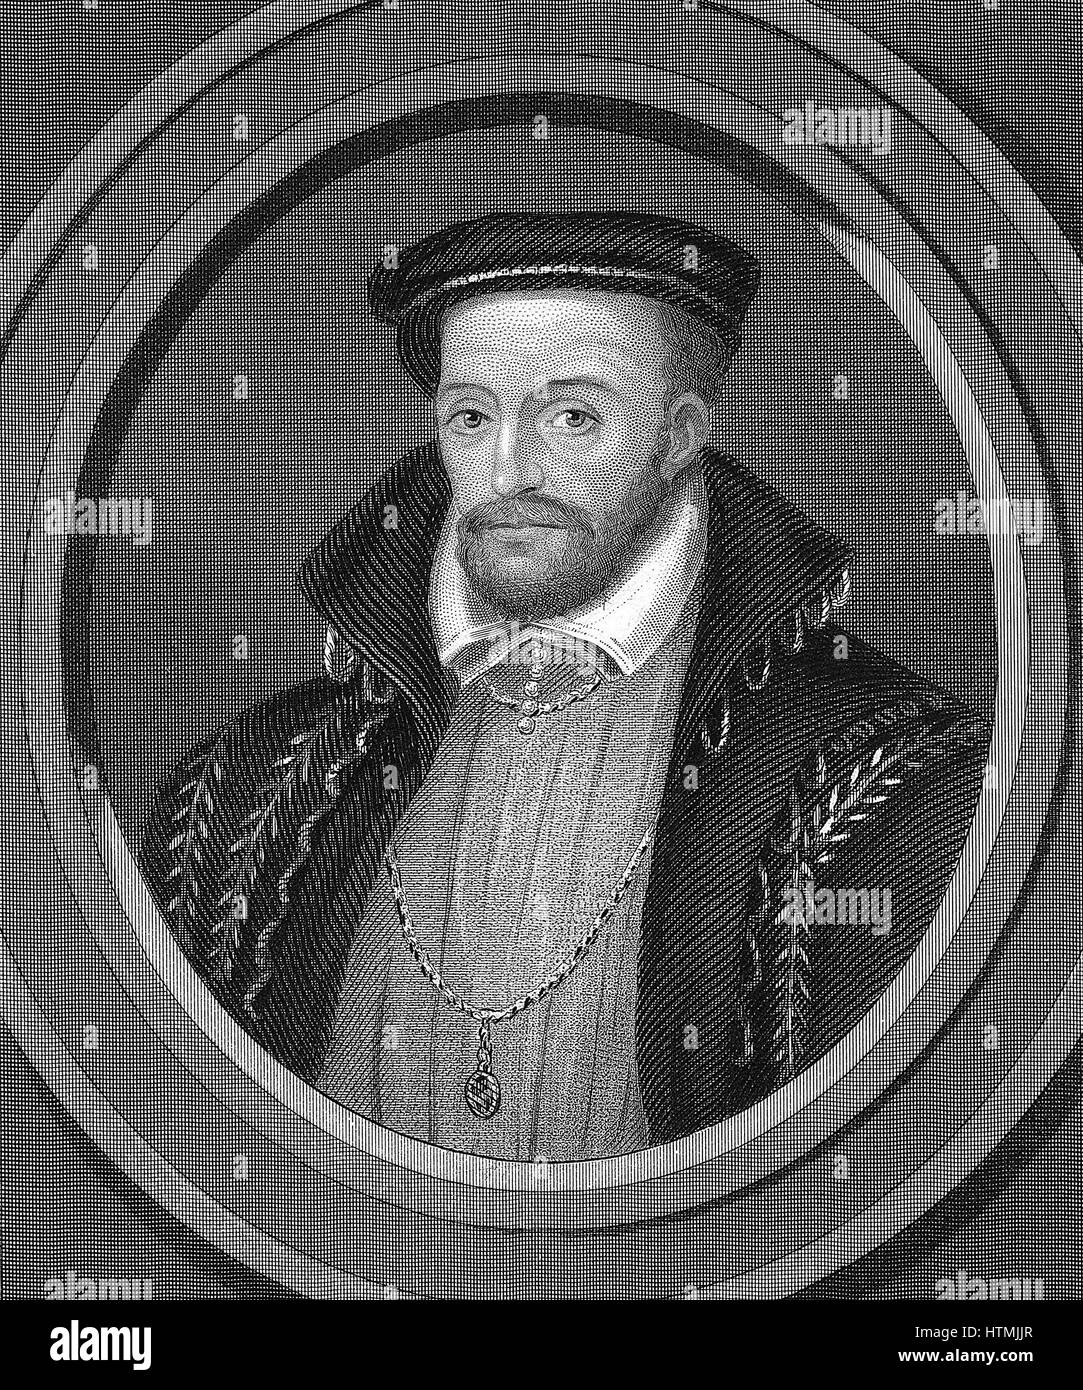 Gaspard de Coligny or Coligni (1517-72) French Huguenot Admiral. Killed in his room in presence of Duc de Guise in Massacre of St Bartholemew, 23 August 1572. Steel engraving 1851 Stock Photo